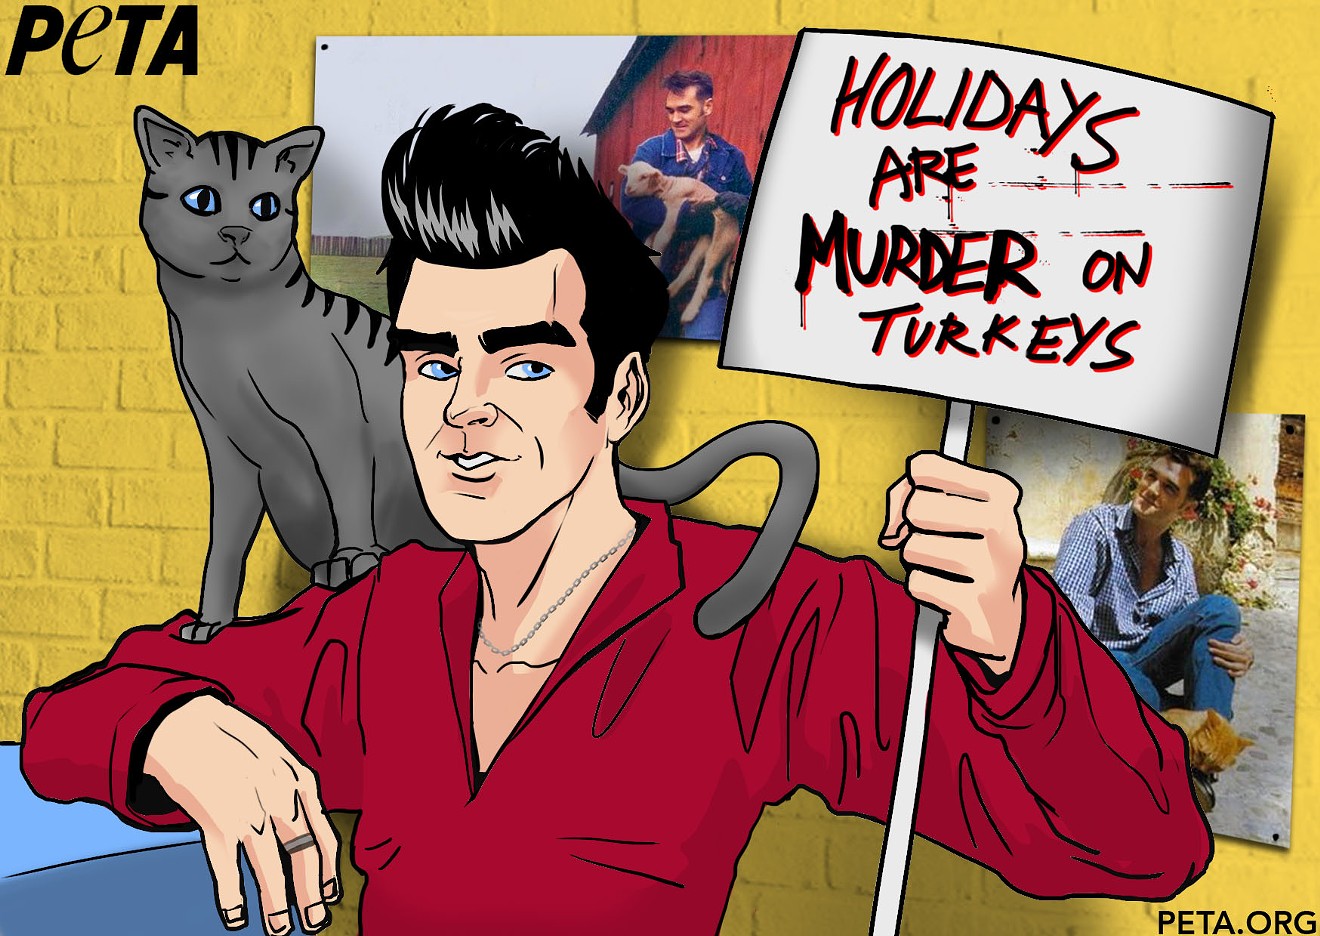 Morrissey and PETA are joining forces to advocate for animals during the holiday season.